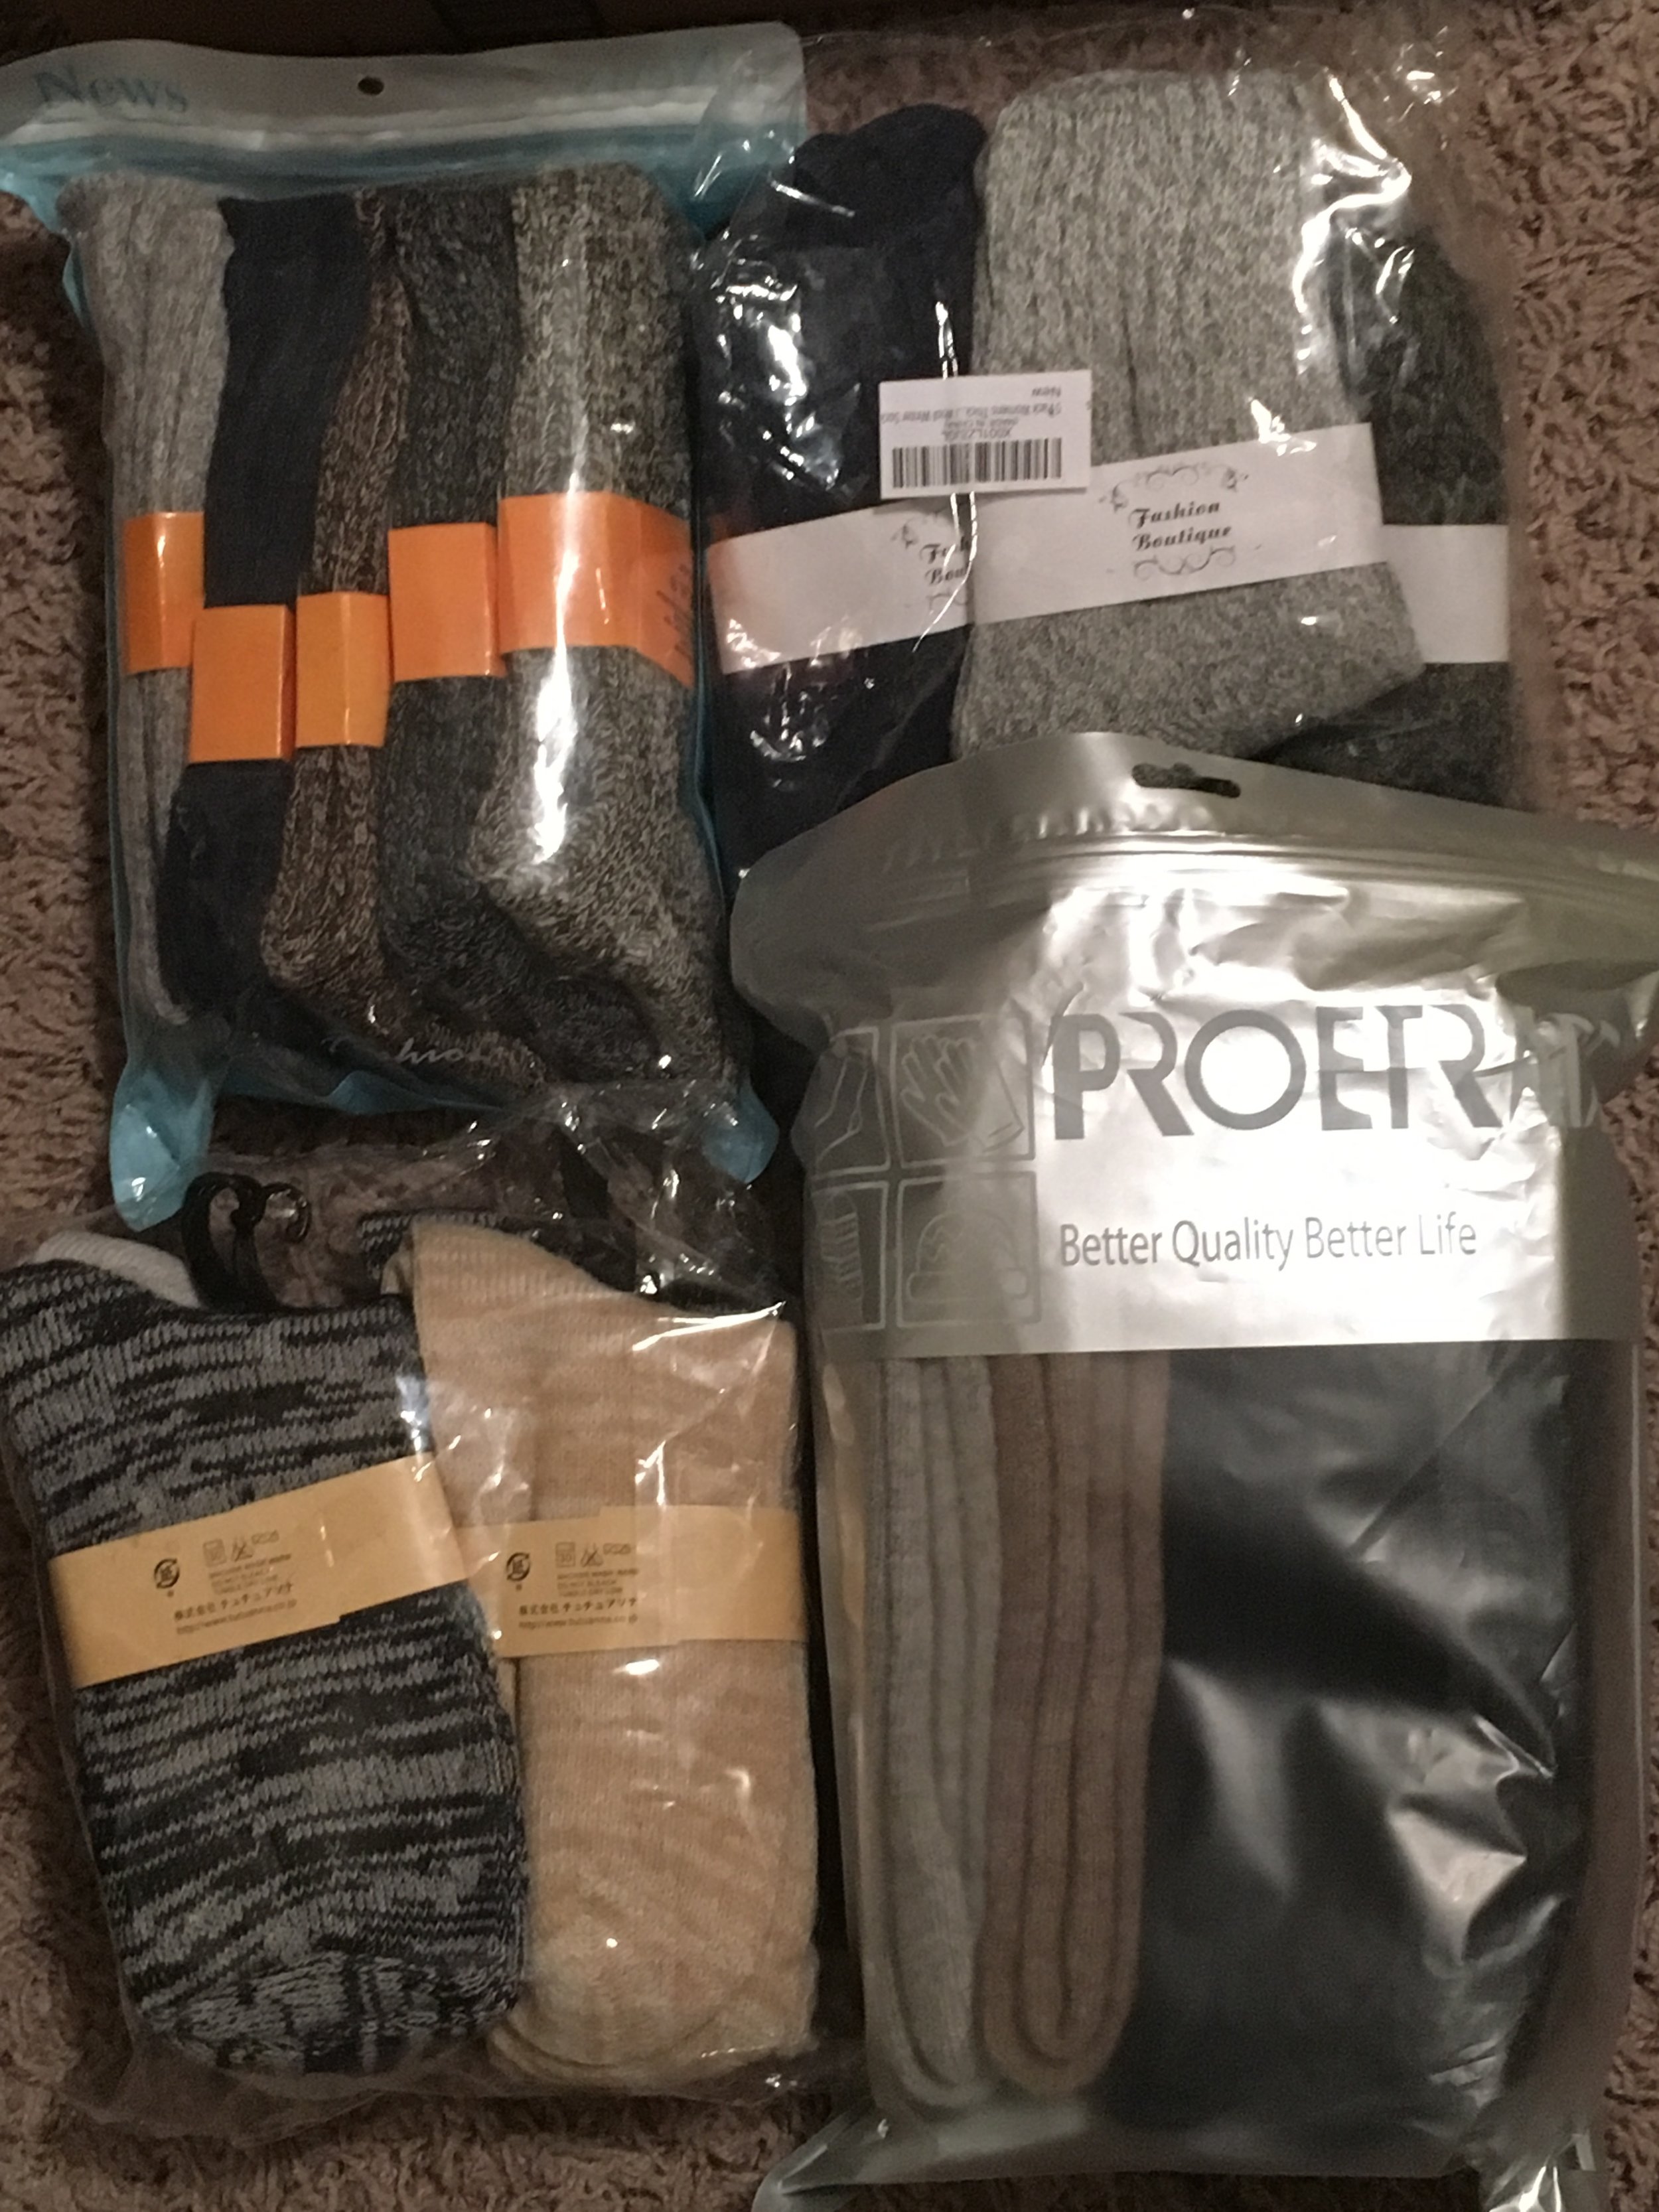     Some people living on the street wear their socks for a month at a time. We had some generous donors help supply us with nice pairs of wool socks this month. Thank you! 